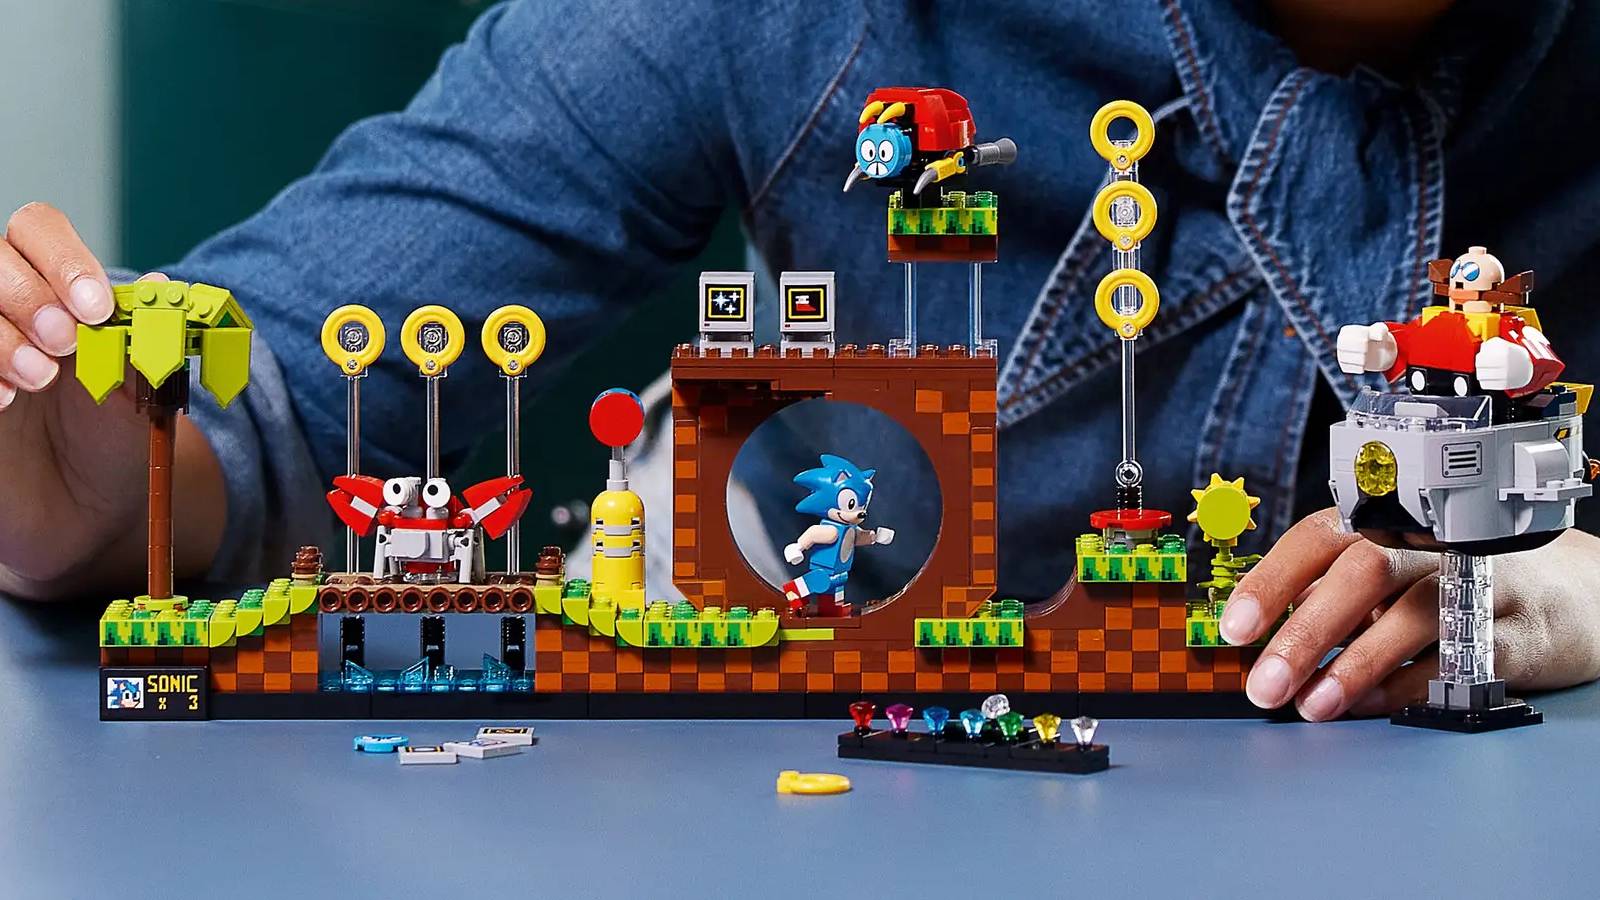 Where to buy LEGO Sonic the Hedgehog sets - Dexerto